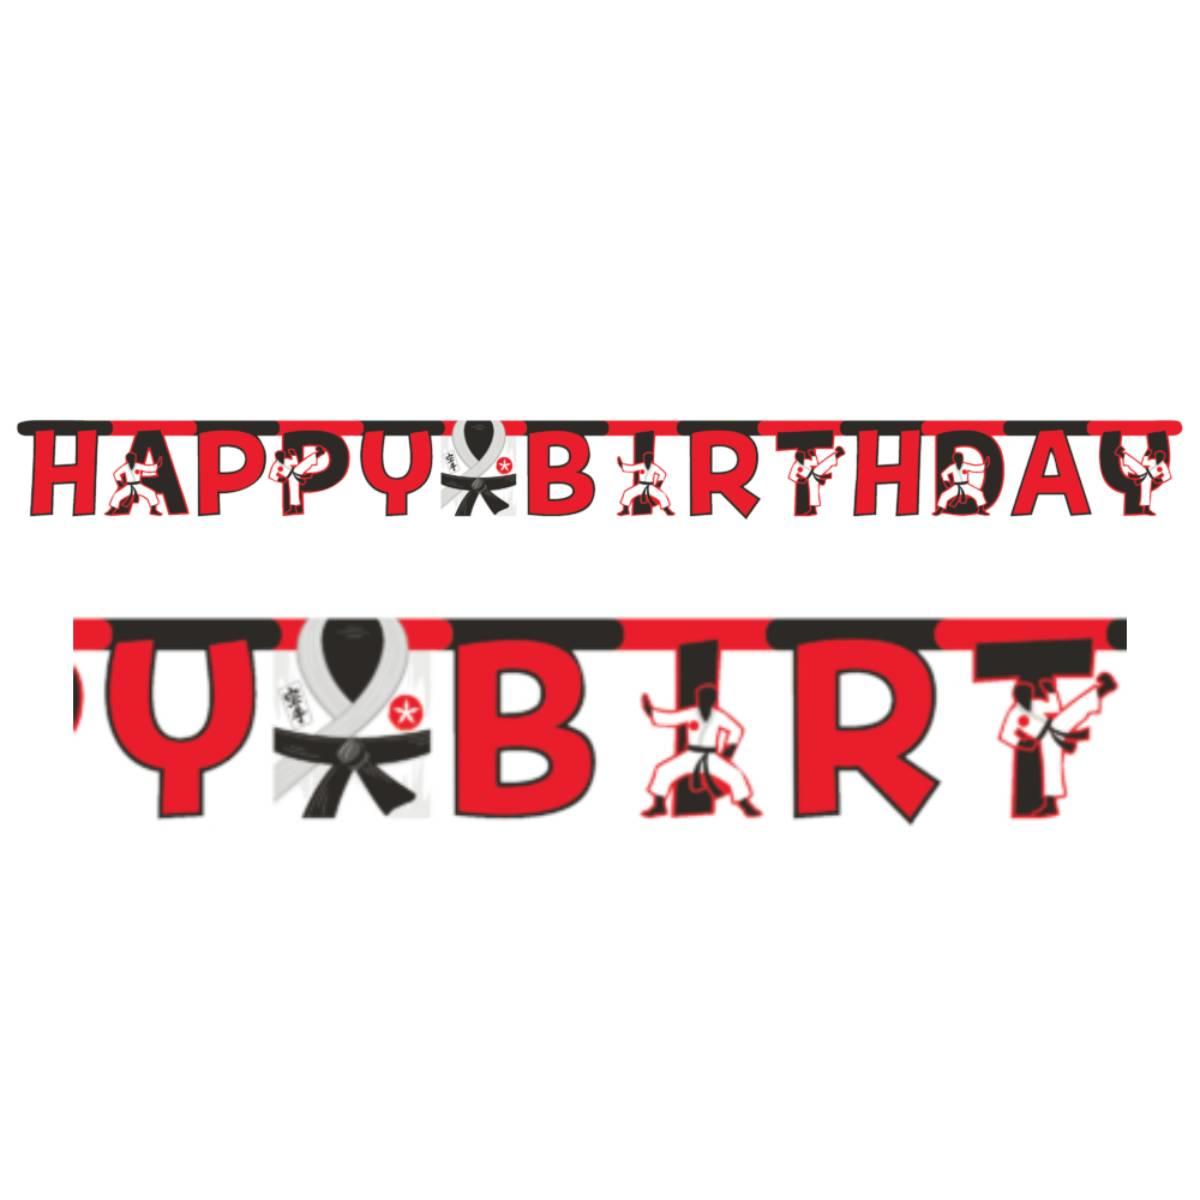 Karate Happy Birthday Letter Banner 10ft by Creative Converting 346370 available here at Karnival Costumes online party shop